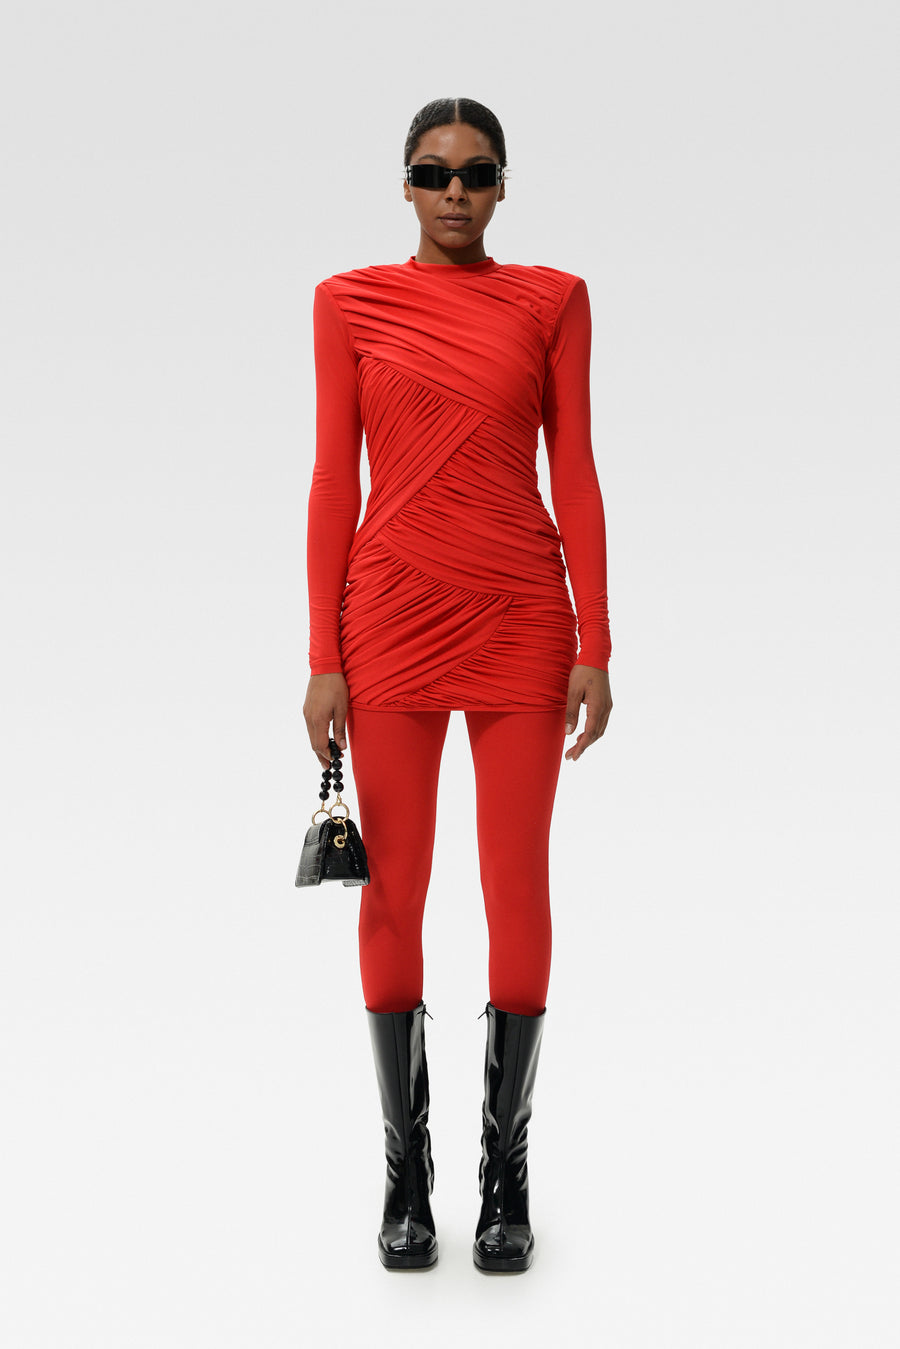 What color tights should you wear with a red dress? - Quora